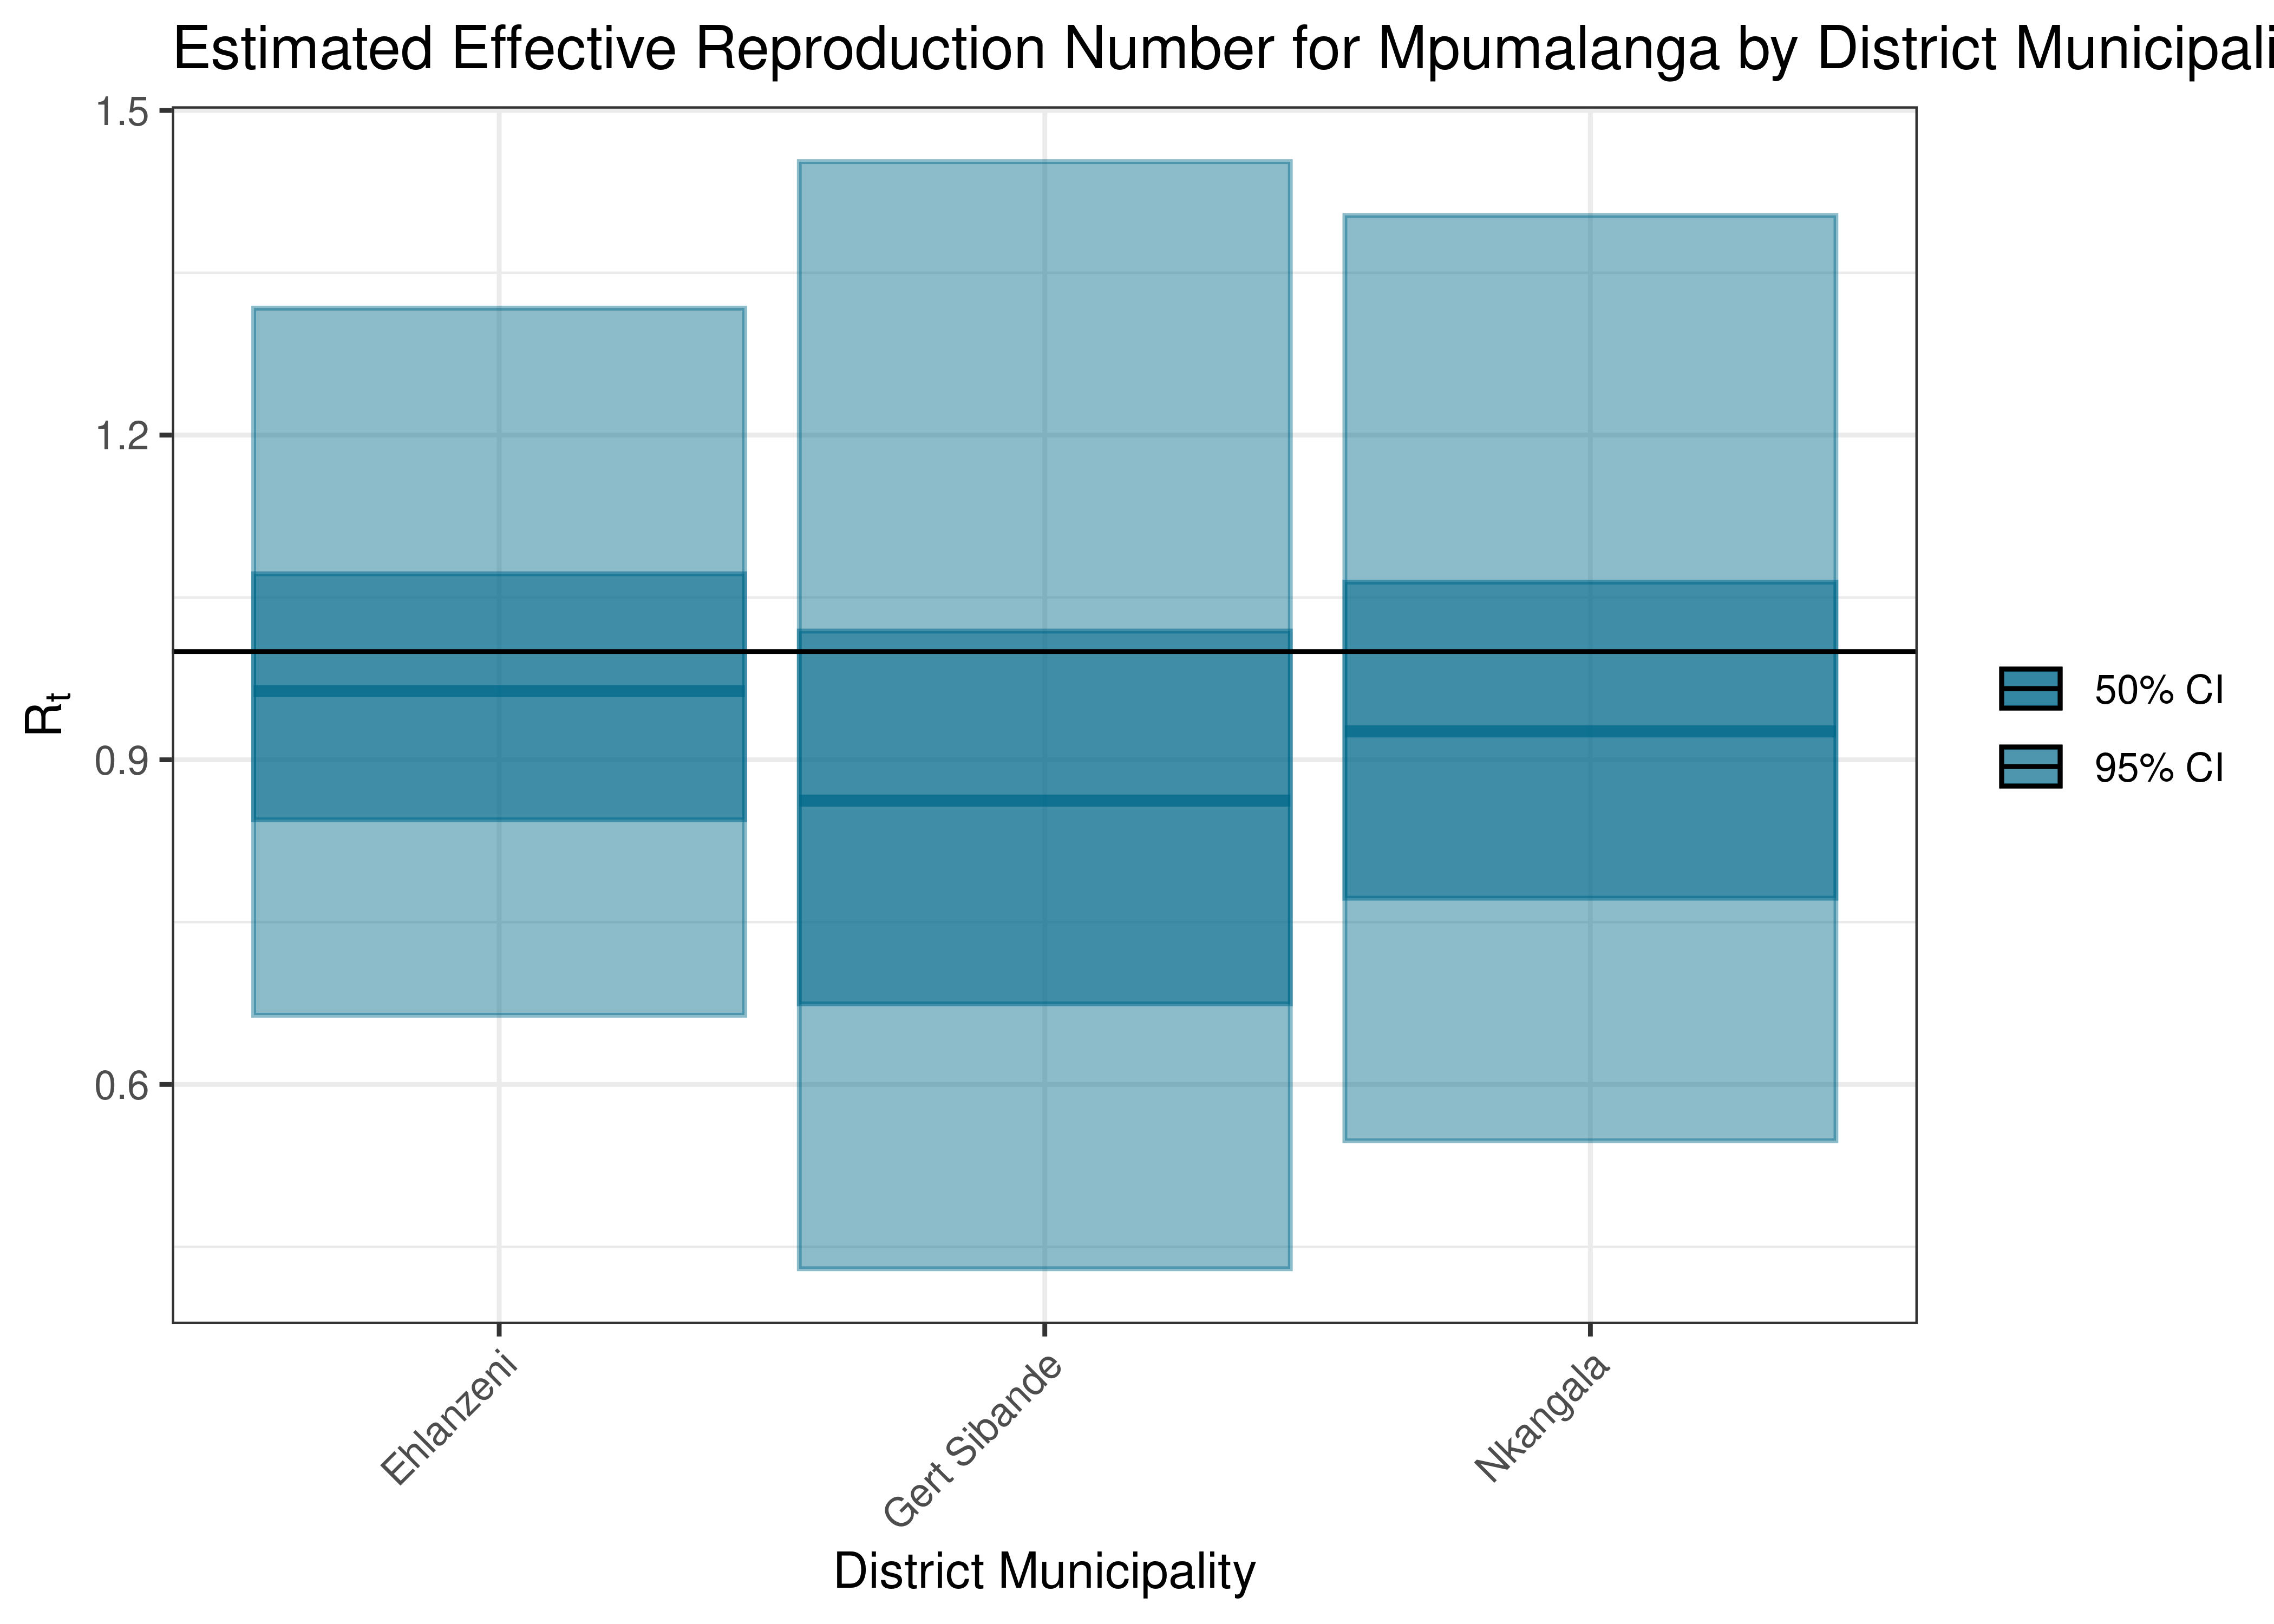 Estimated Effective Reproduction Number for Mpumalanga by District Municipality